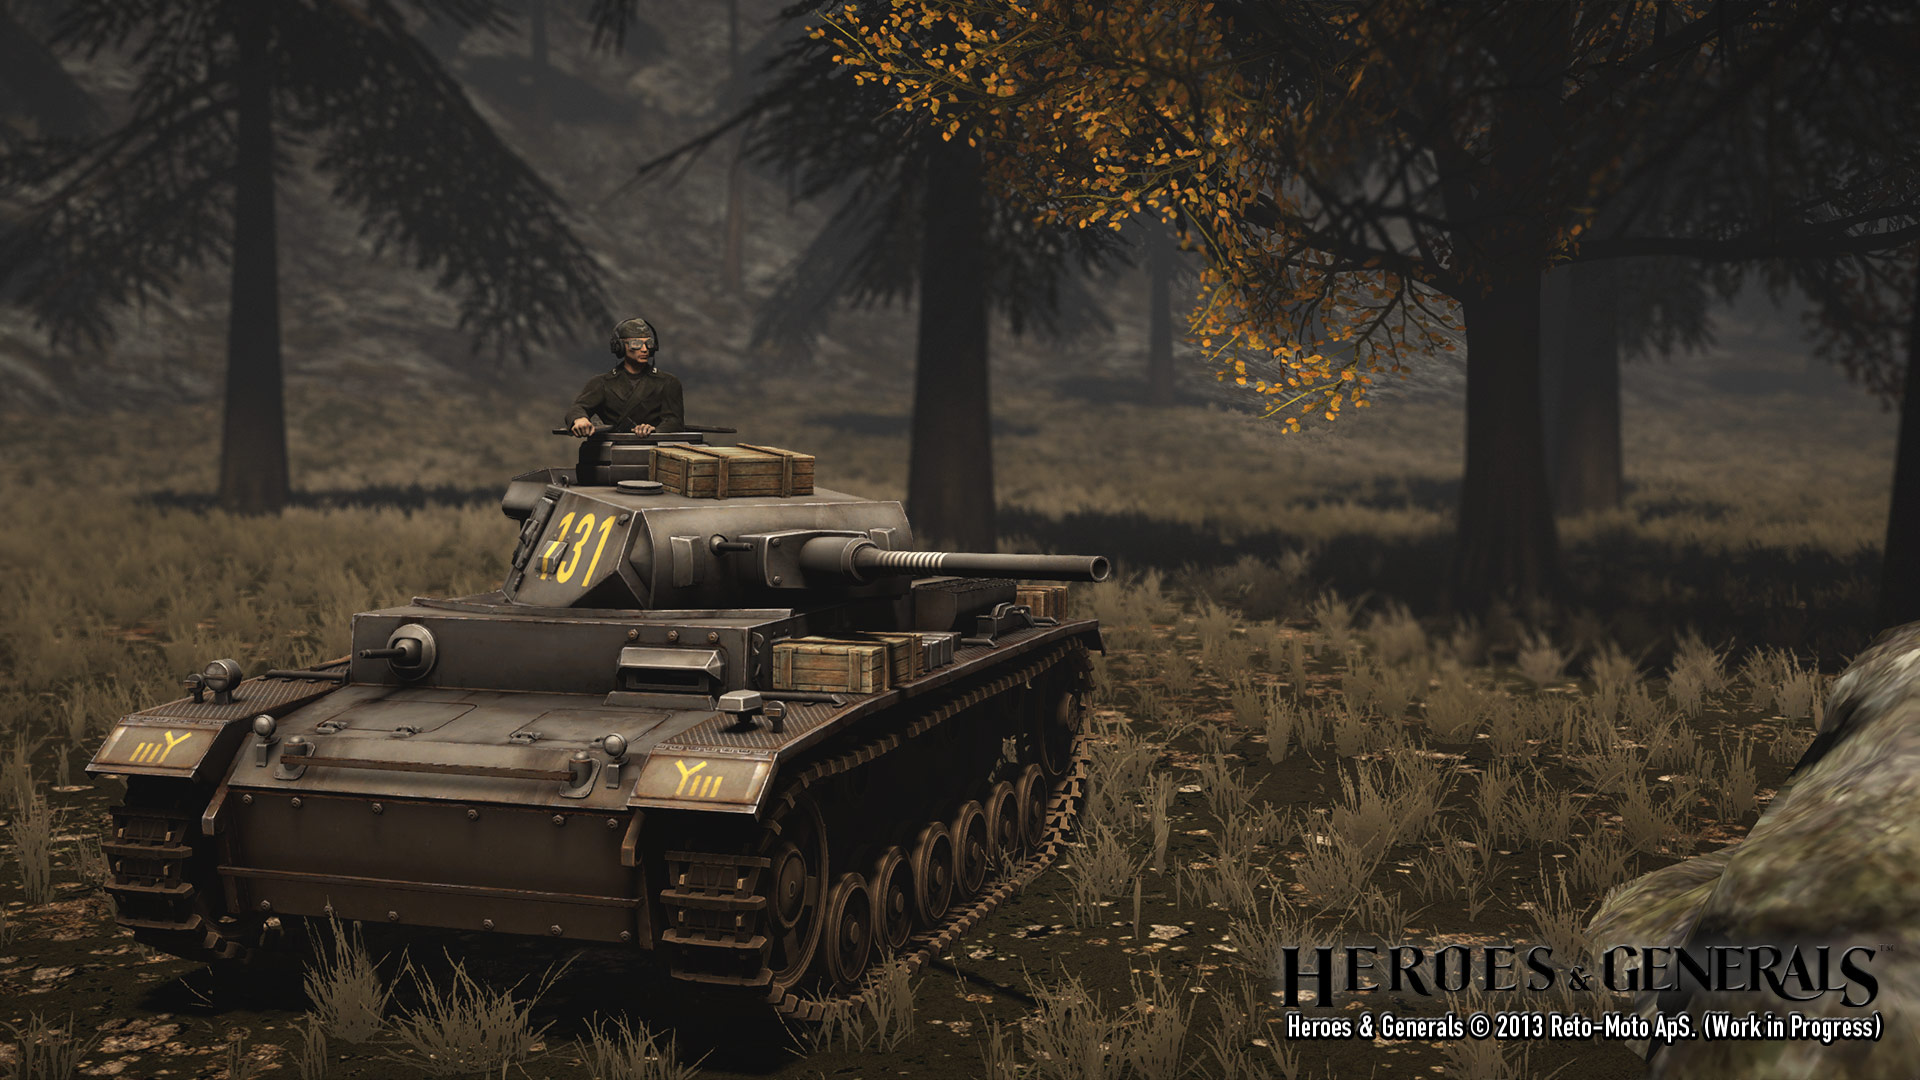 And Shaders For Panzer I Iii Heroes Generals Hq